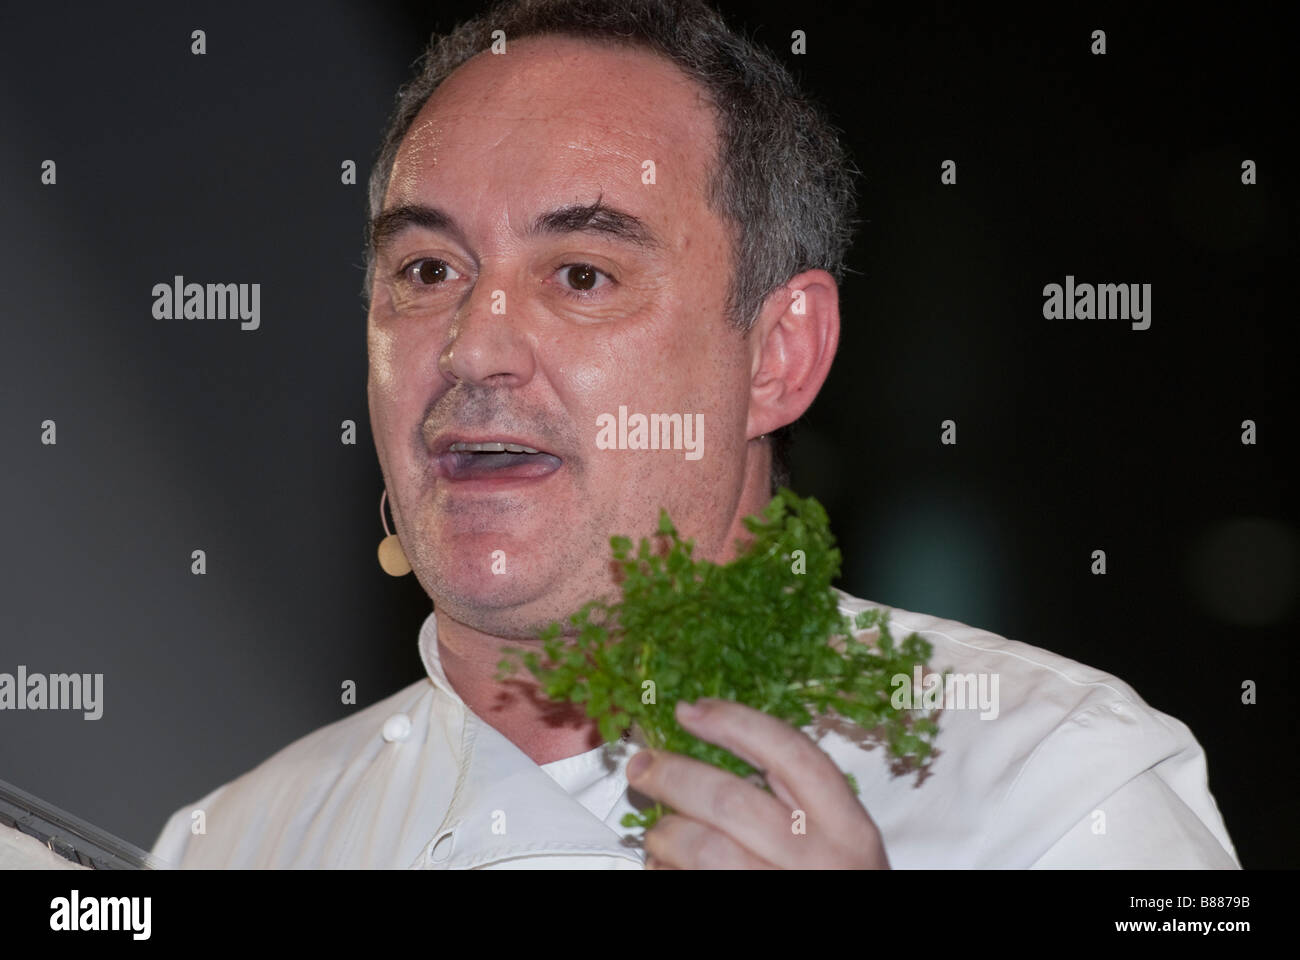 Chef Ferran Adria gives a speech and demonstration at the Tokyo Taste: The World Summit of Gastronomy 2009, 10 February 2009. Stock Photo